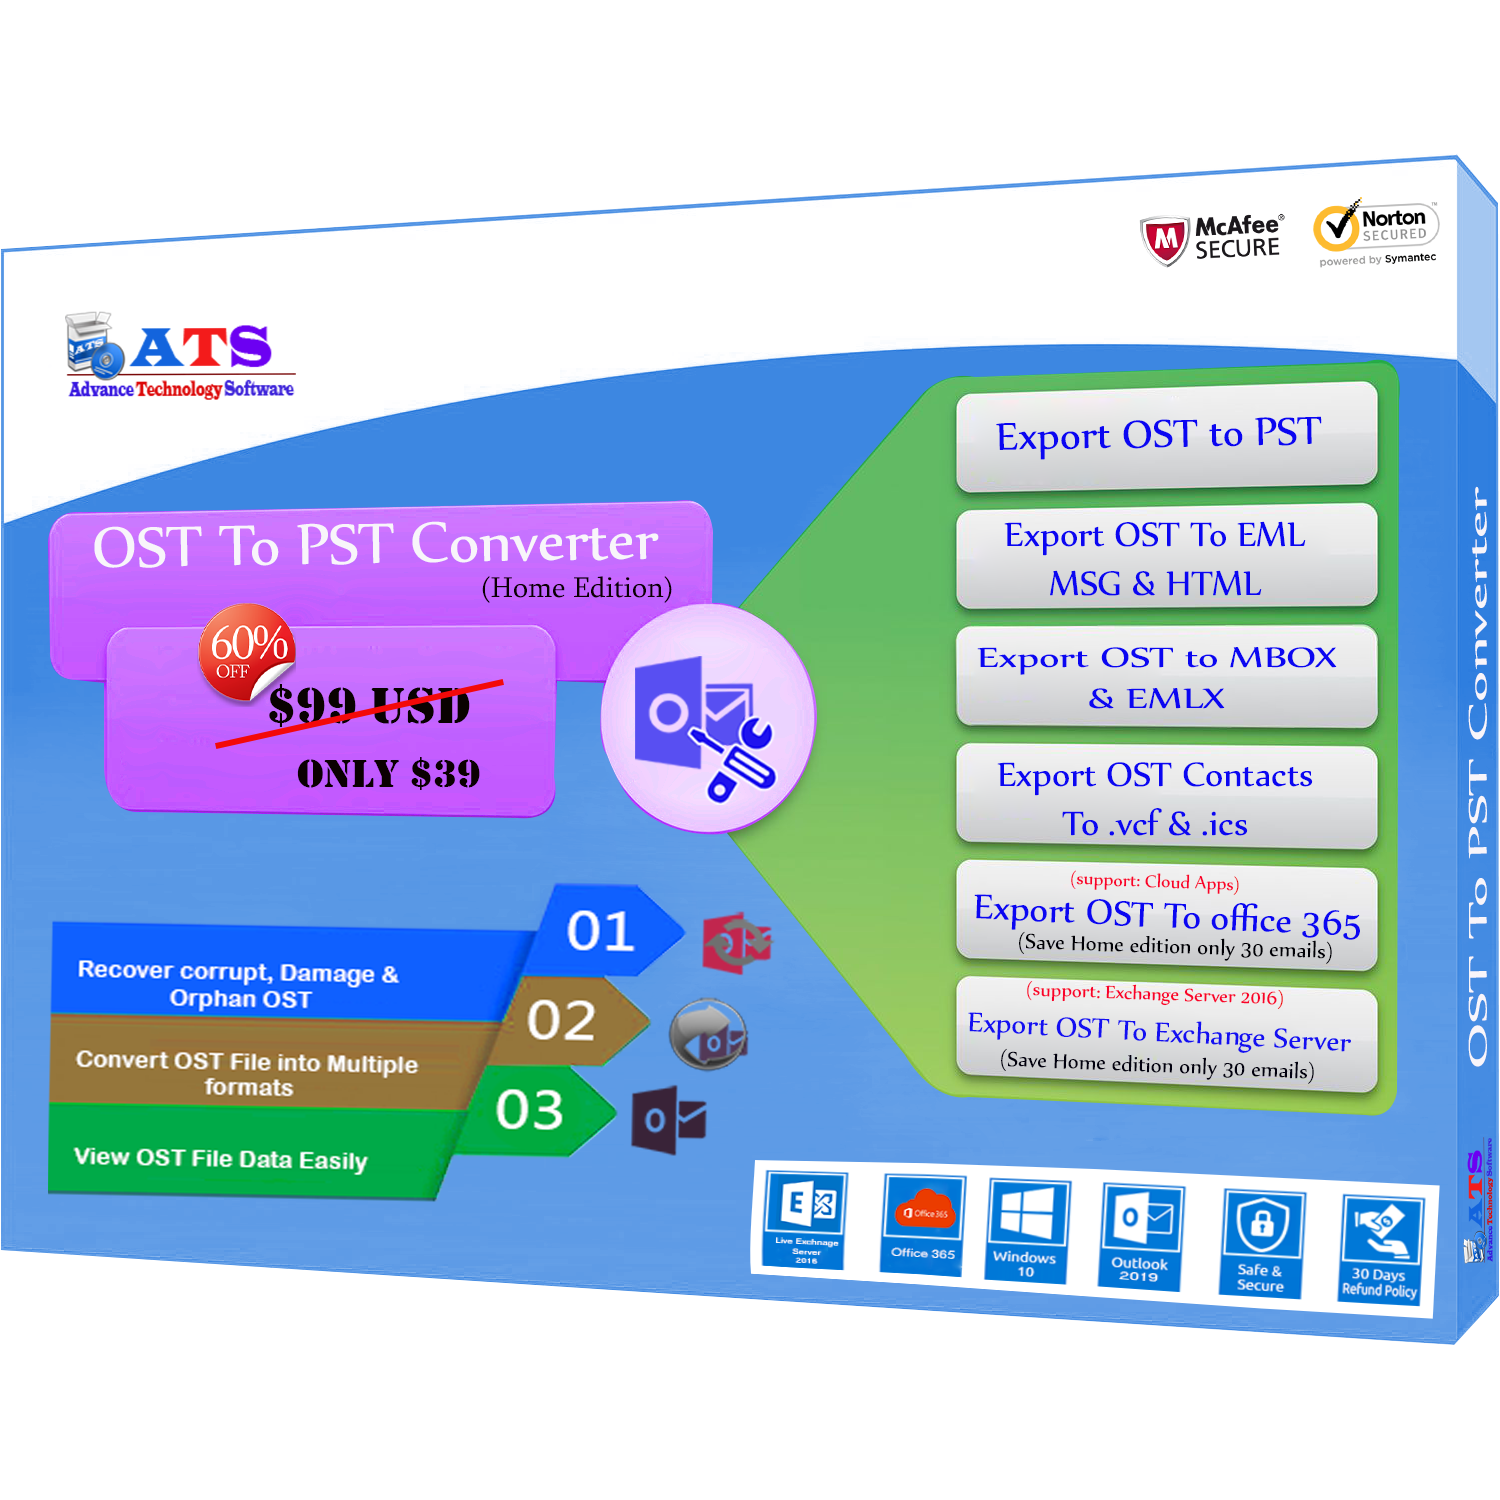 ATS OST to PST Converter